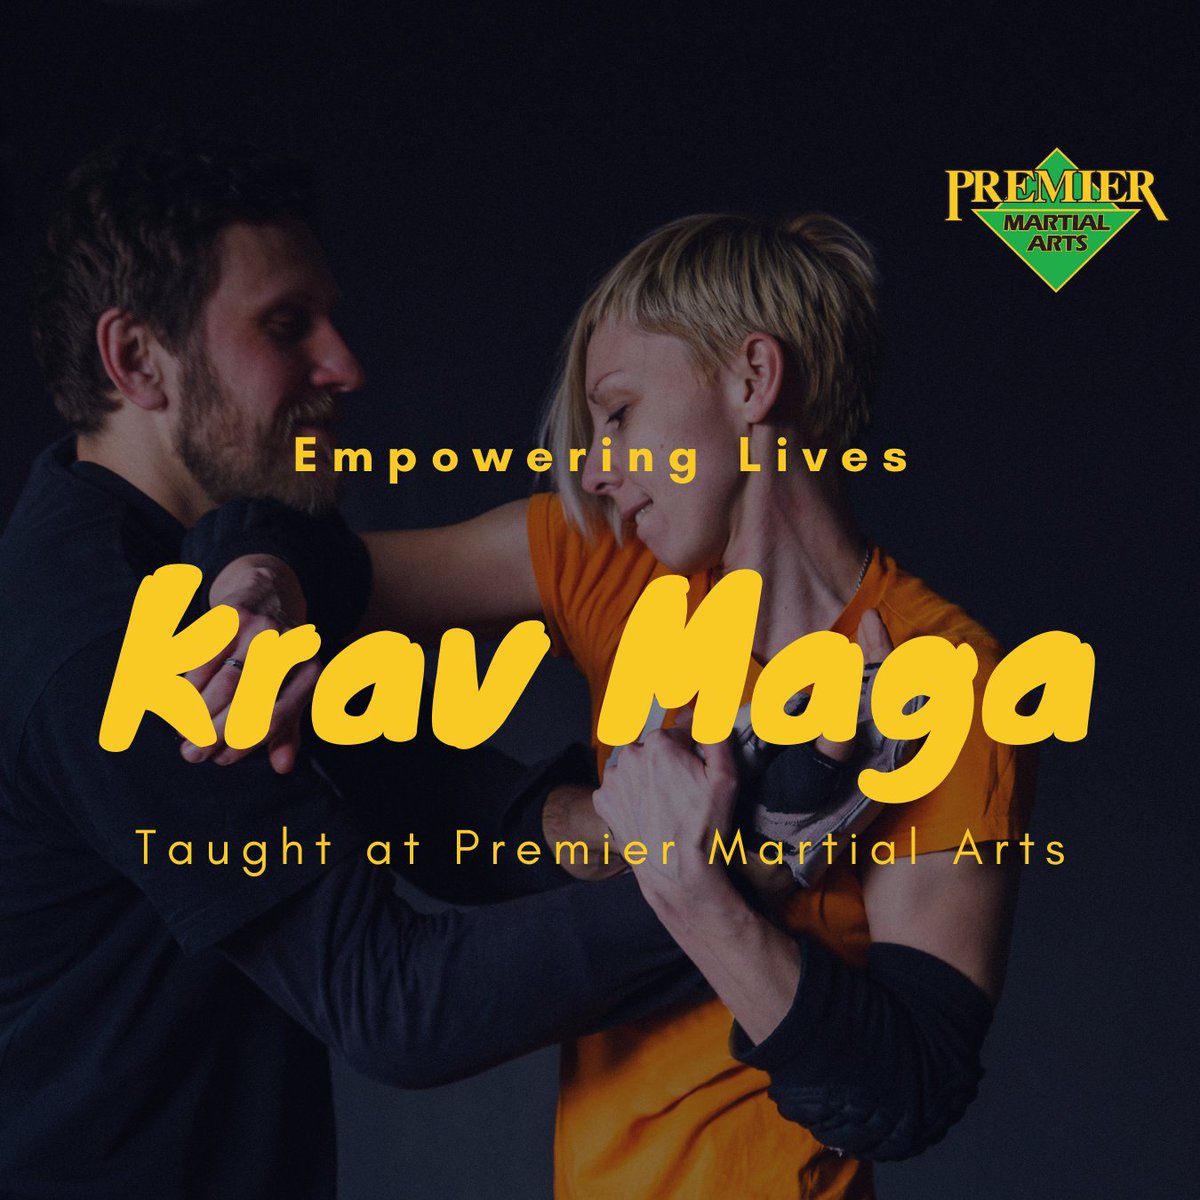 Krav Maga: The art of survival. Learn practical techniques that can save your life in dangerous situations. Train with experts who prioritize your safety and success. #ArtOfSurvival #KravMaga #SelfDefense Invest in yourself today! Enroll at PremierMartialArts.com/adult-martial-… or Call...